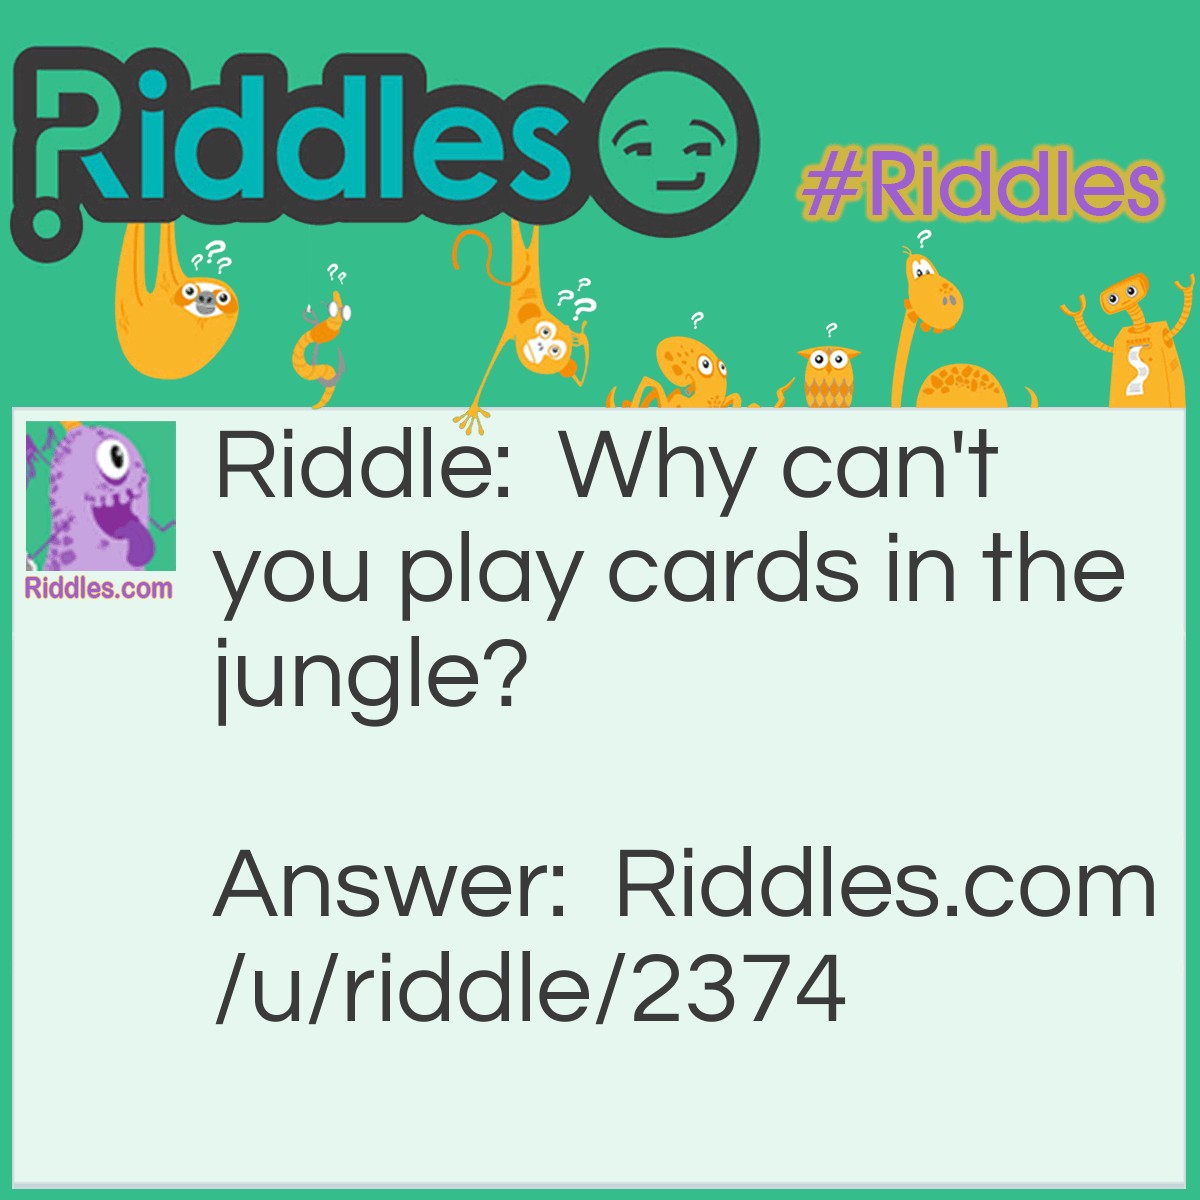 Riddle: Why can't you play cards in the jungle? Answer: Because there are lots of cheetahs (cheaters).